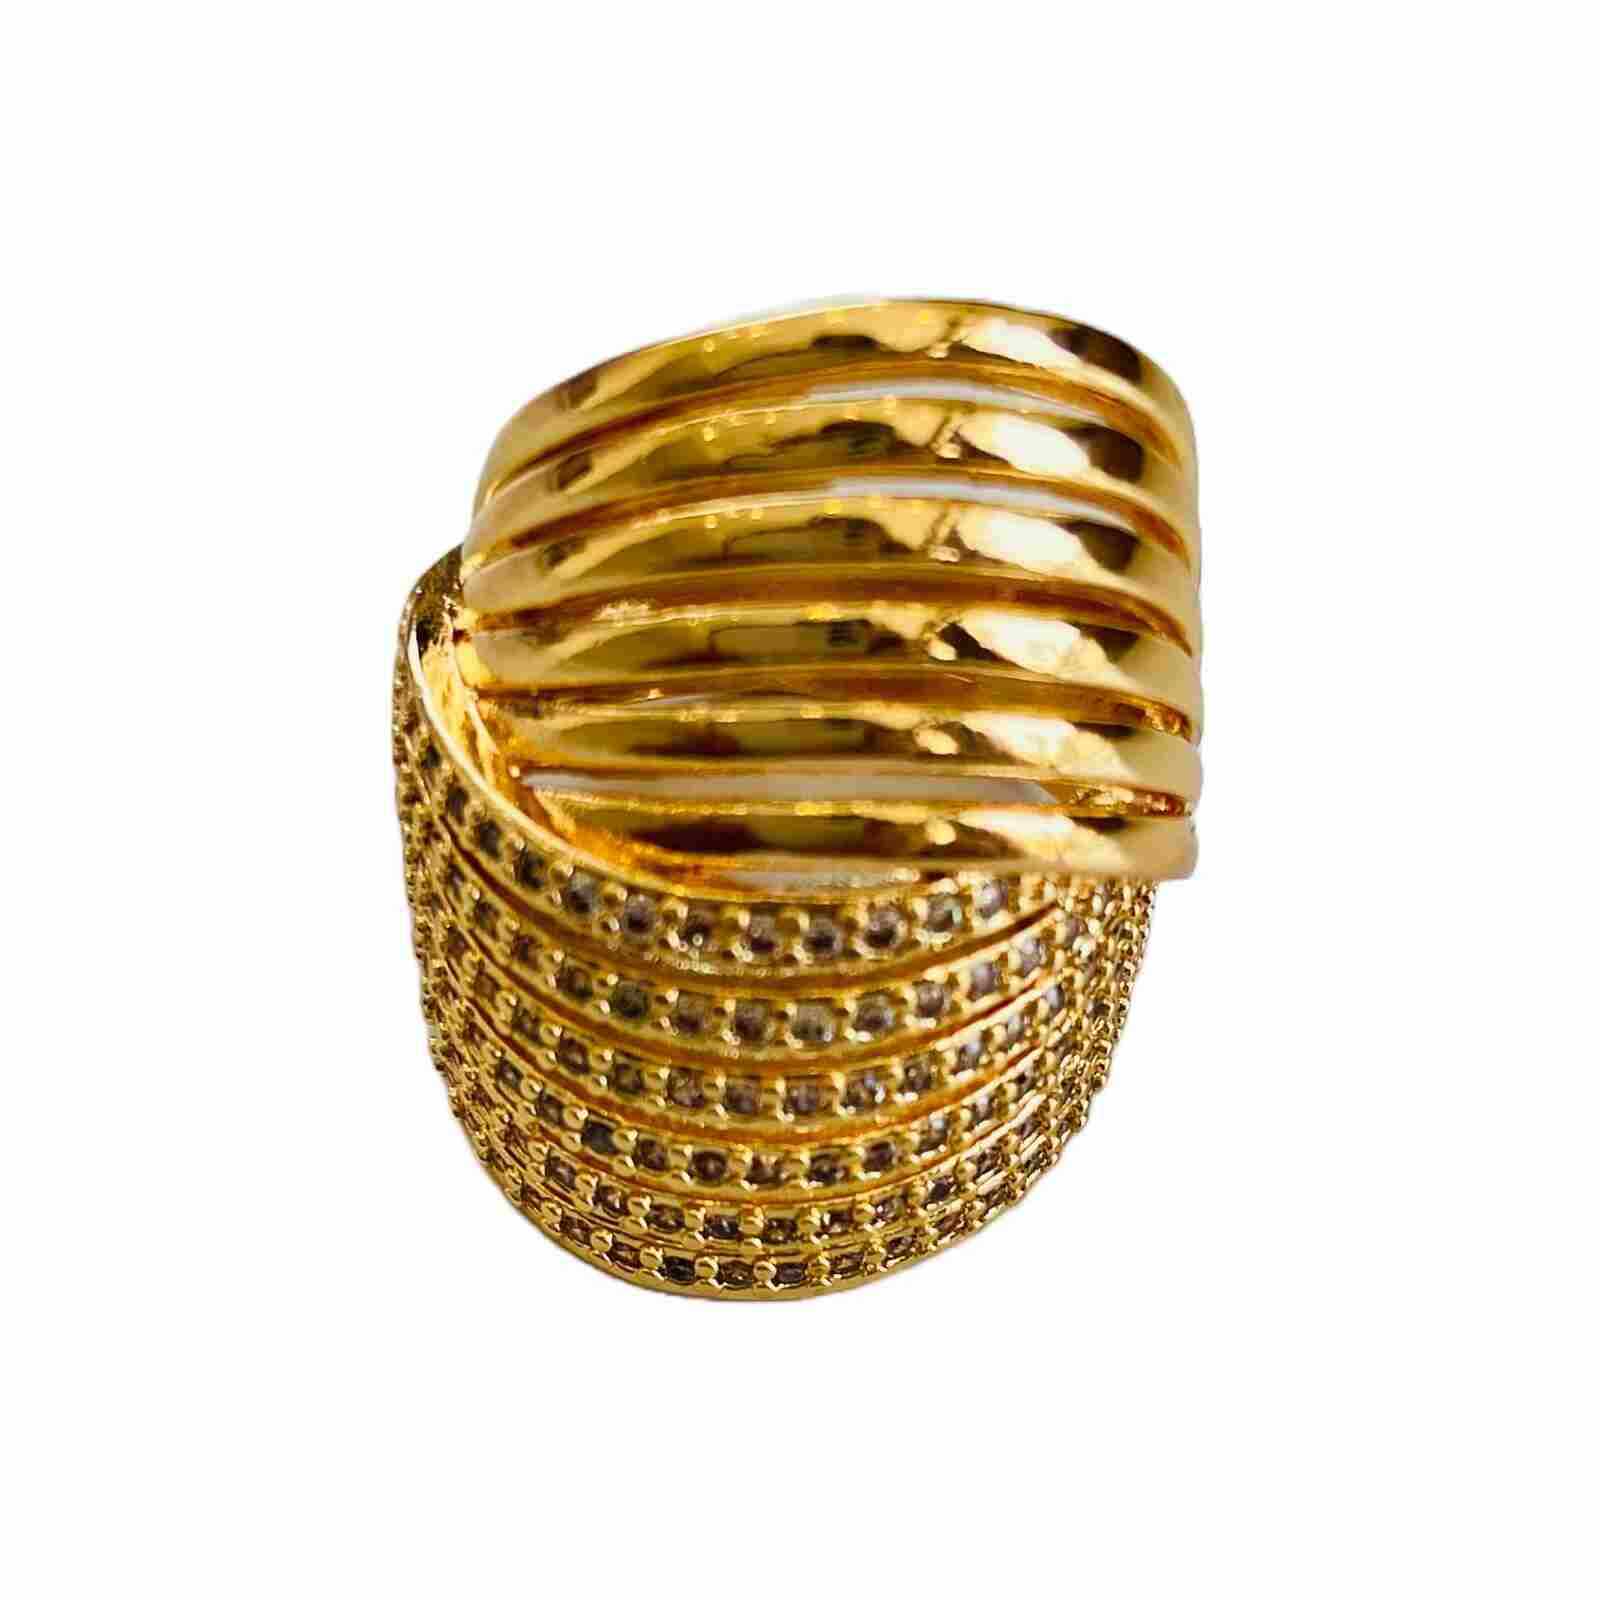 86% OFF on VK Jewels Flower Leaf Design Shaped for Women and Girls Alloy  Cubic Zirconia Gold Plated Ring on Flipkart | PaisaWapas.com